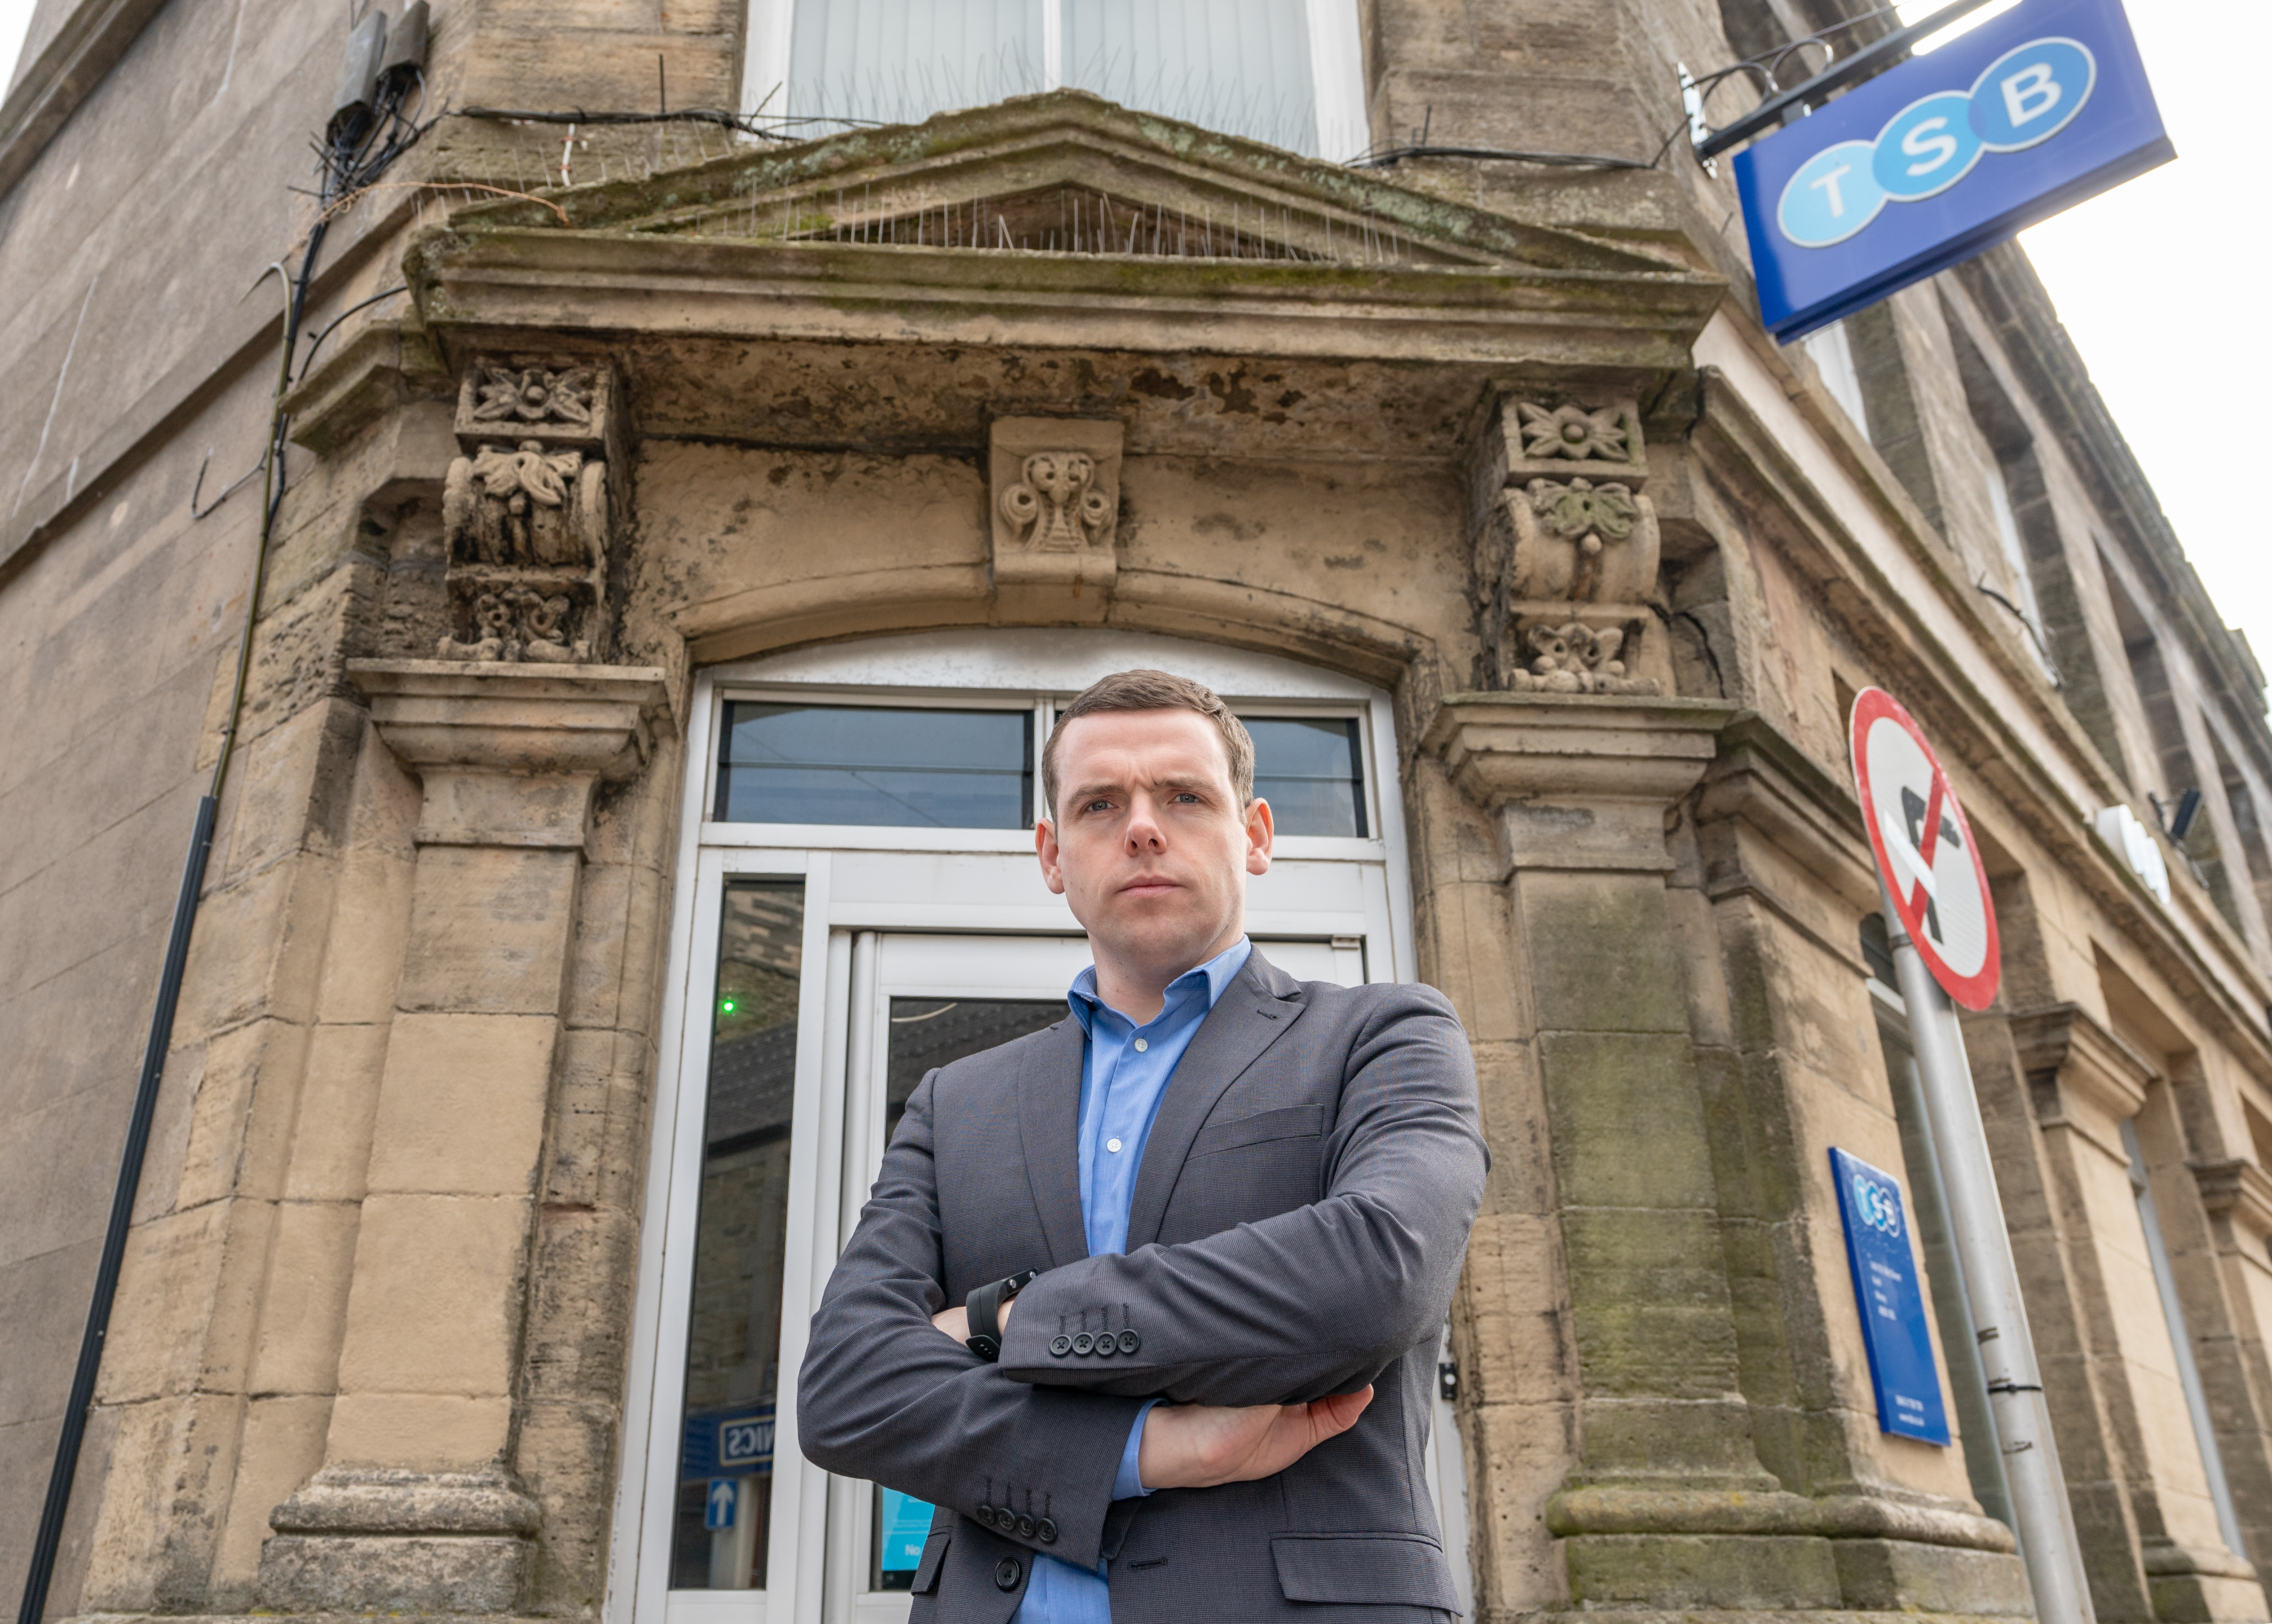 This is MP for Moray, Douglas Ross at the TSB in Mid Street, Keith, Moray, Scotland which is due to close. Photographed by JASPERIMAGE ©